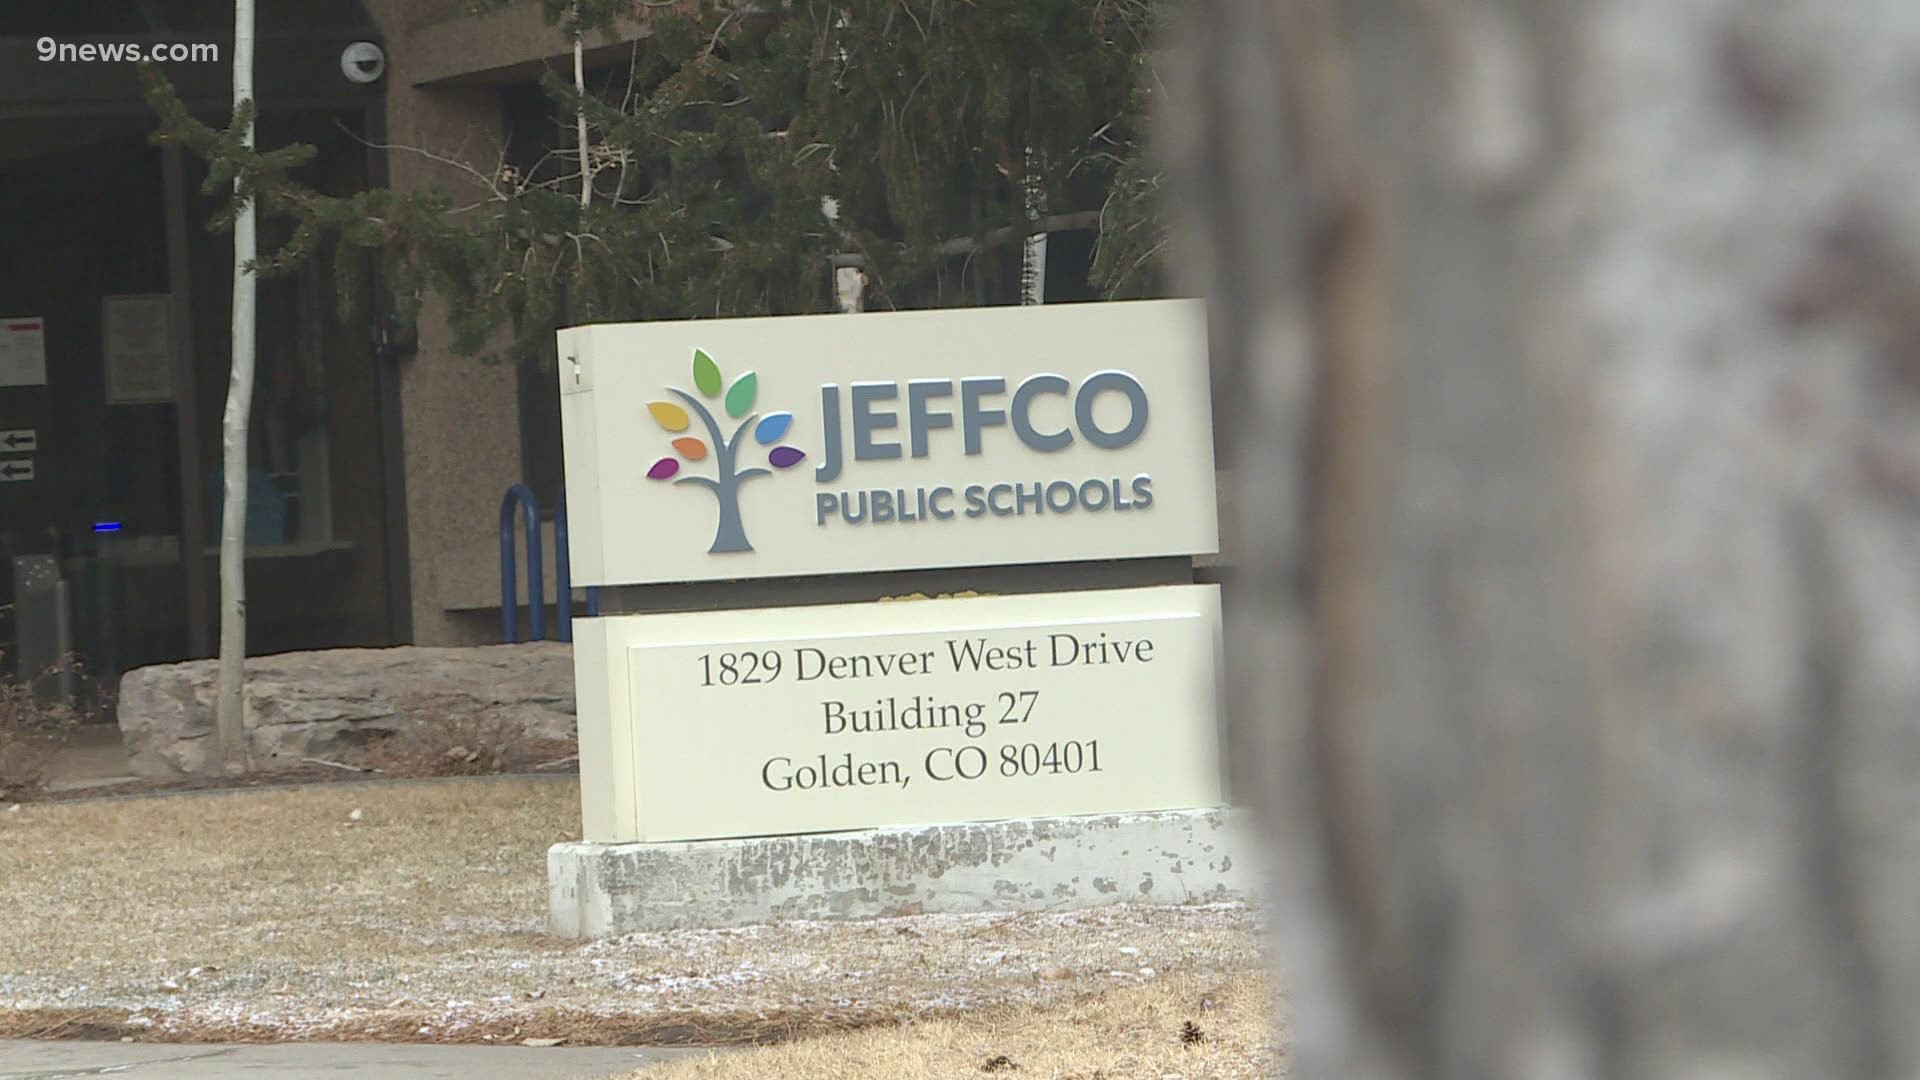 After the debacle last weekend with Jefferson County Schools sending teachers in a mad dash for vaccines, frustrations continued with communication about their plan.